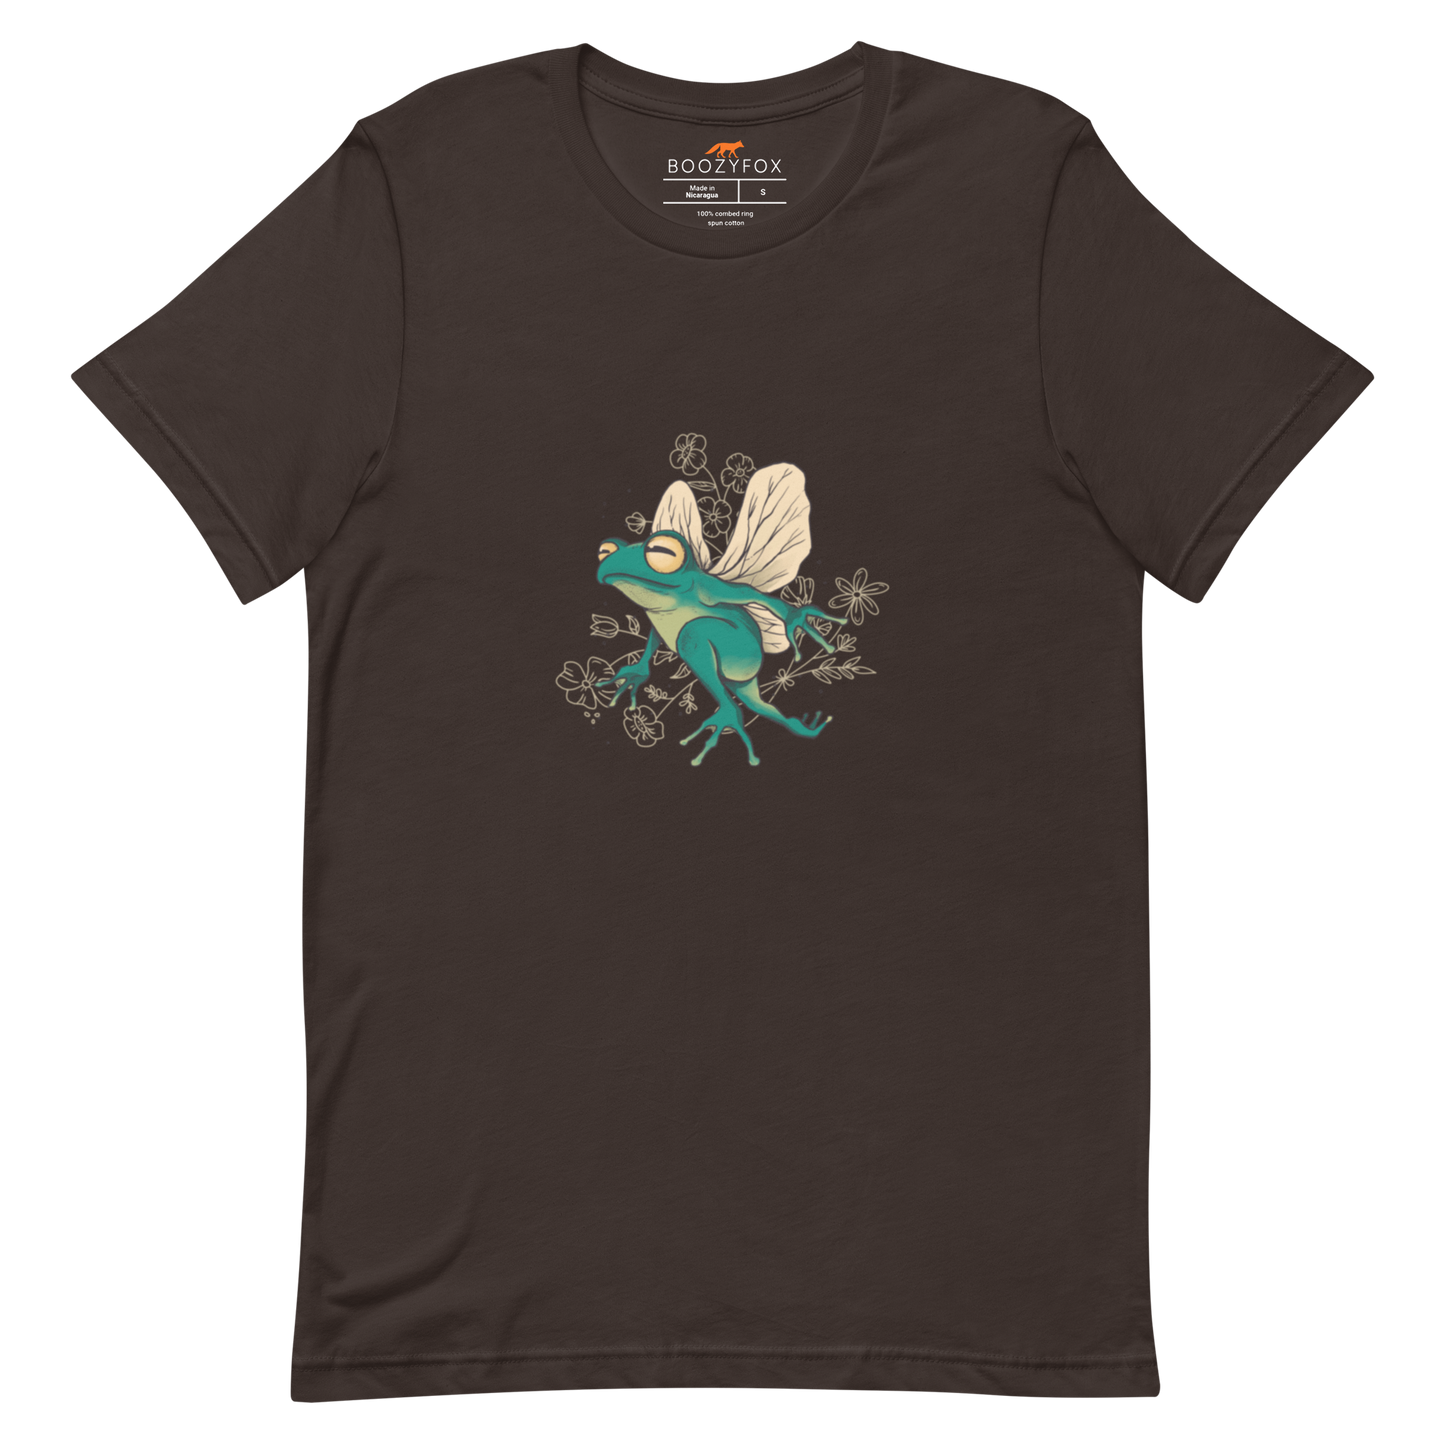 Brown Premium Frog T-Shirt featuring an adorable Fairy Frog graphic on the chest - Funny Graphic Frog Tees - Boozy Fox